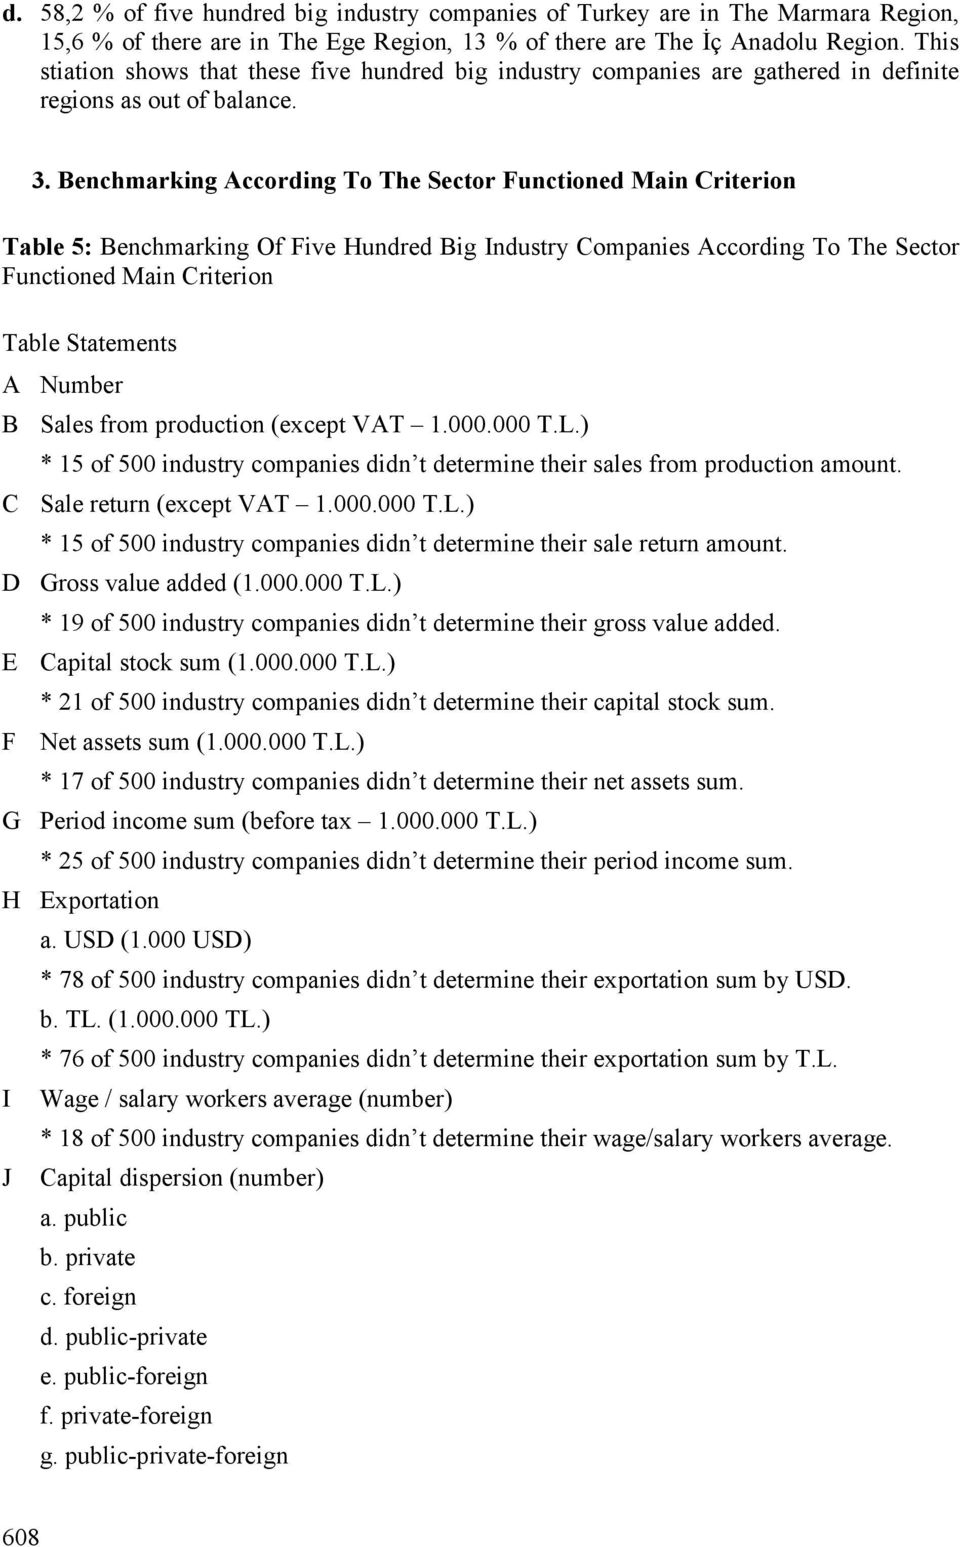 Benchmarking According To The Sector Functioned Main Criterion Table 5: Benchmarking Of Five Hundred Big Industry Companies According To The Sector Functioned Main Criterion Table Statements A Number